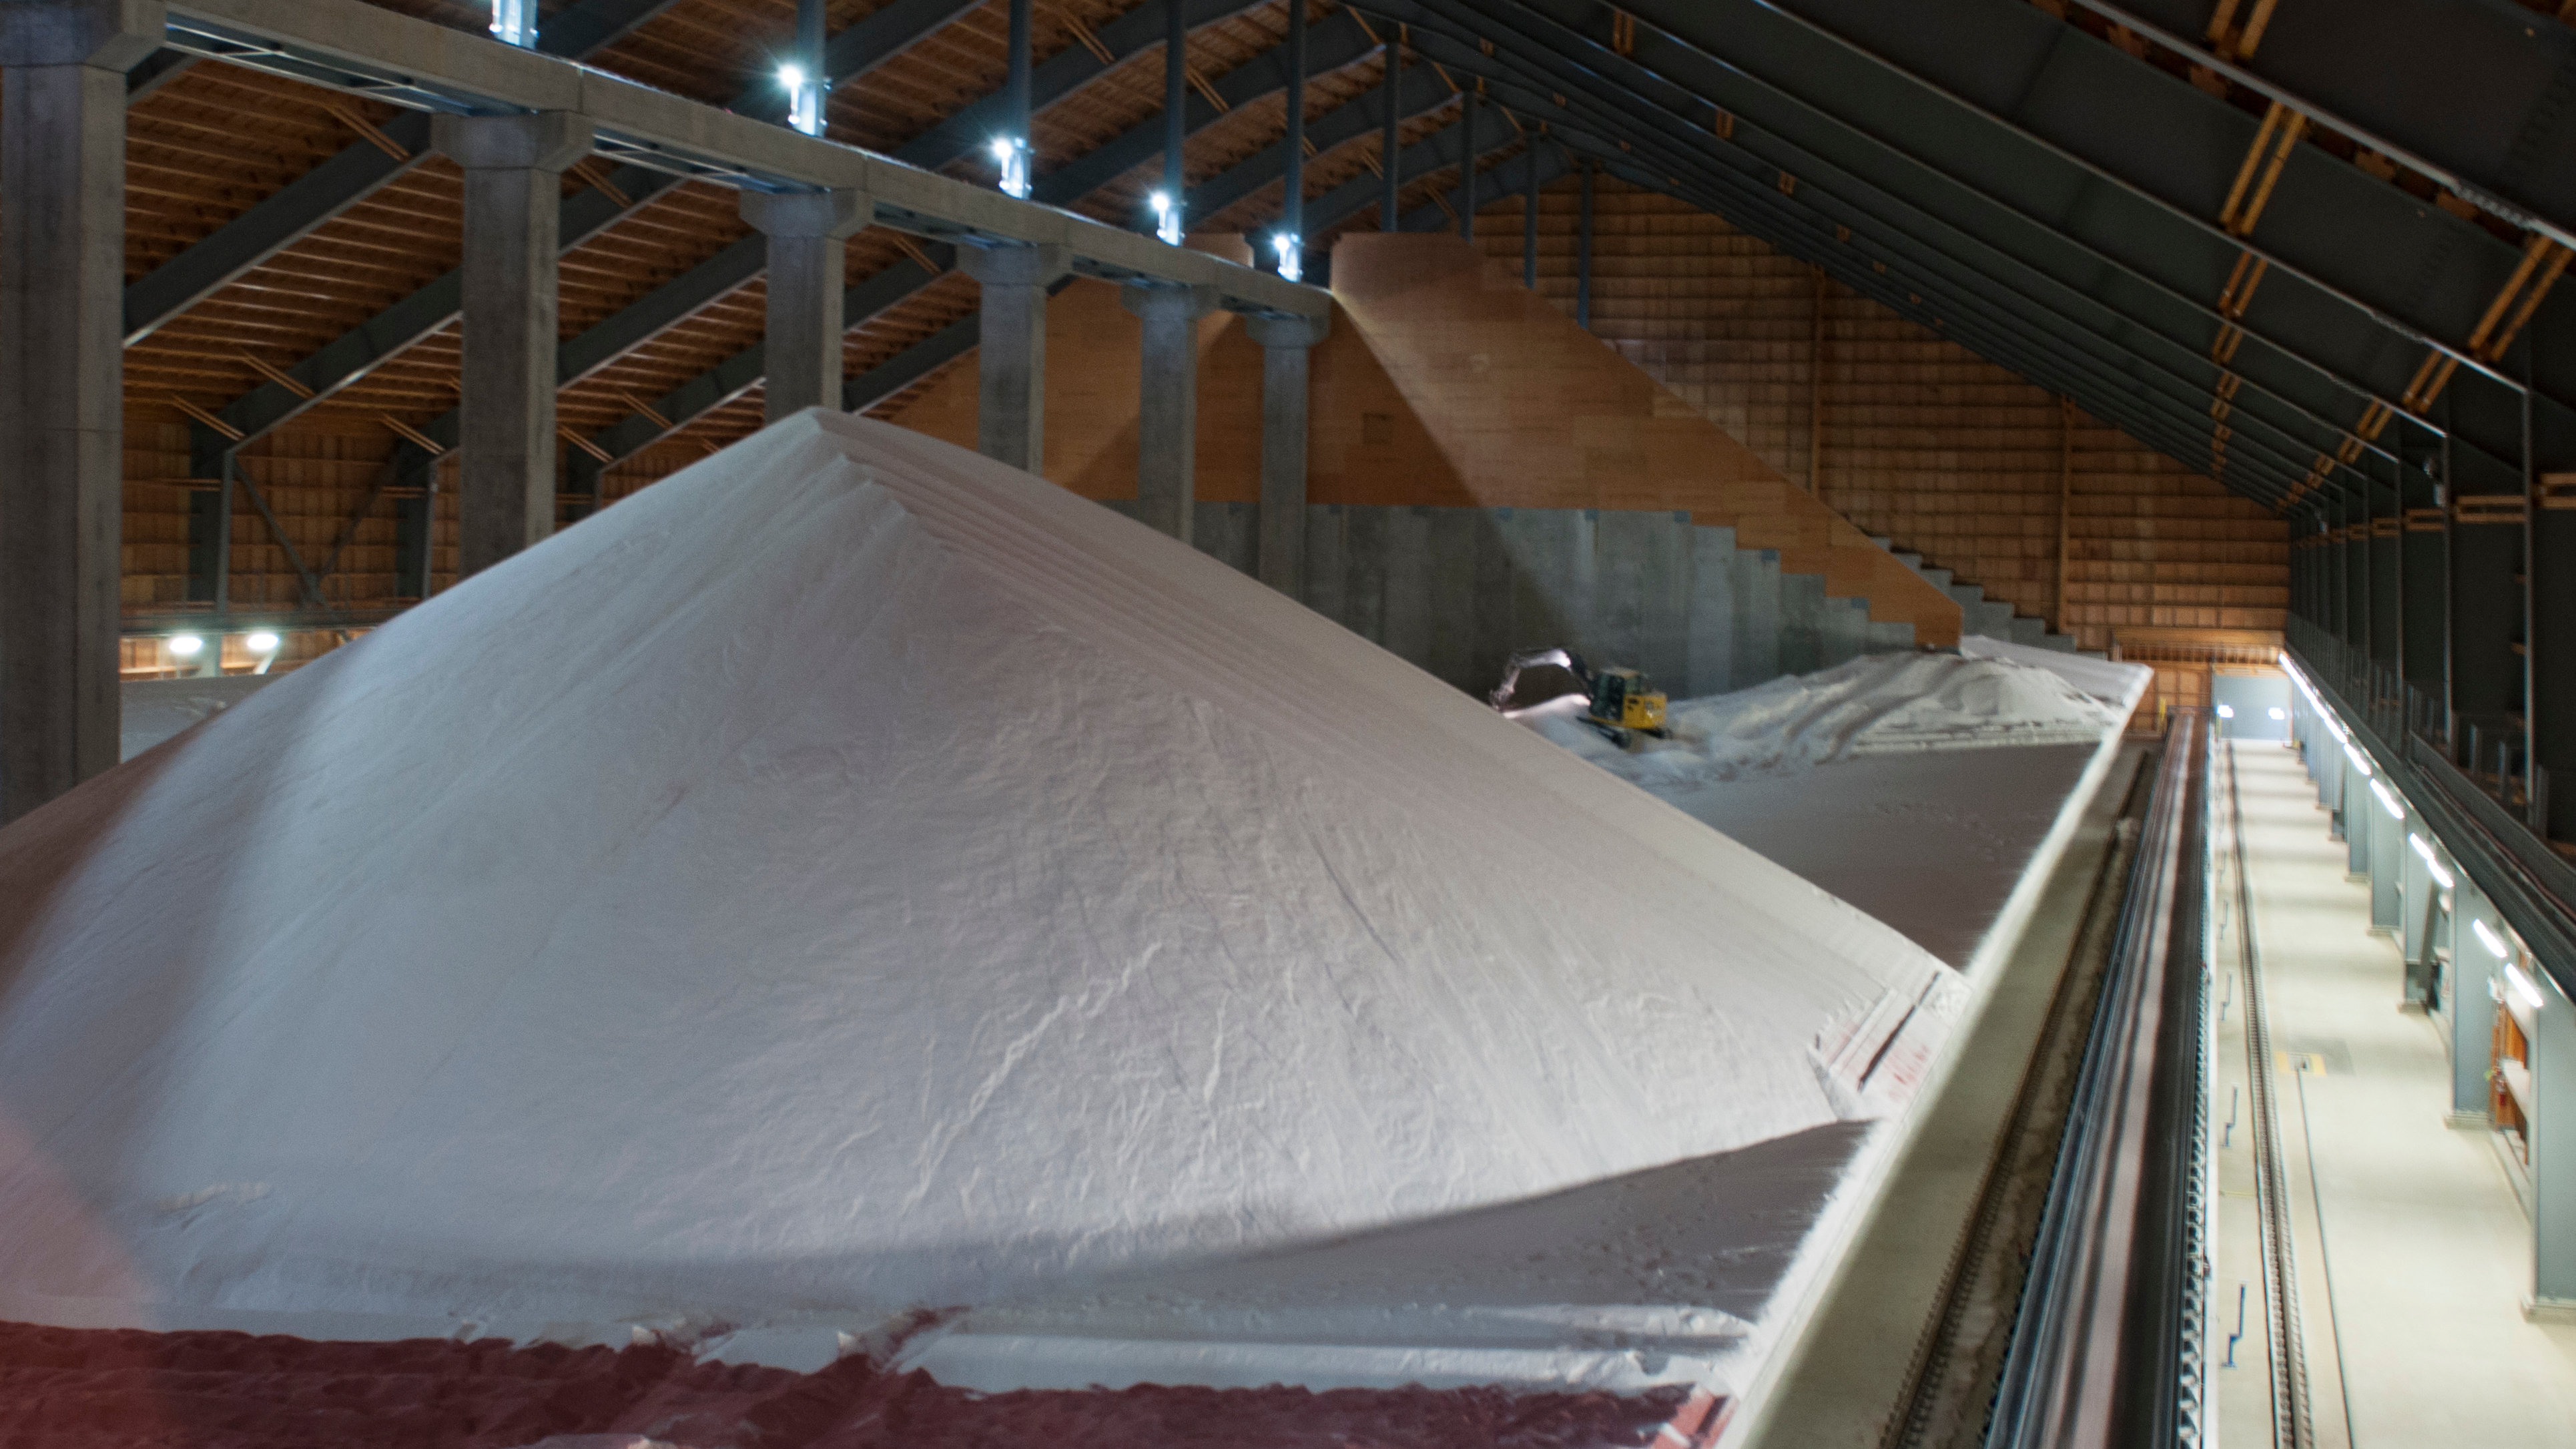 MOP Standard white in Port Moody shed (16:9)